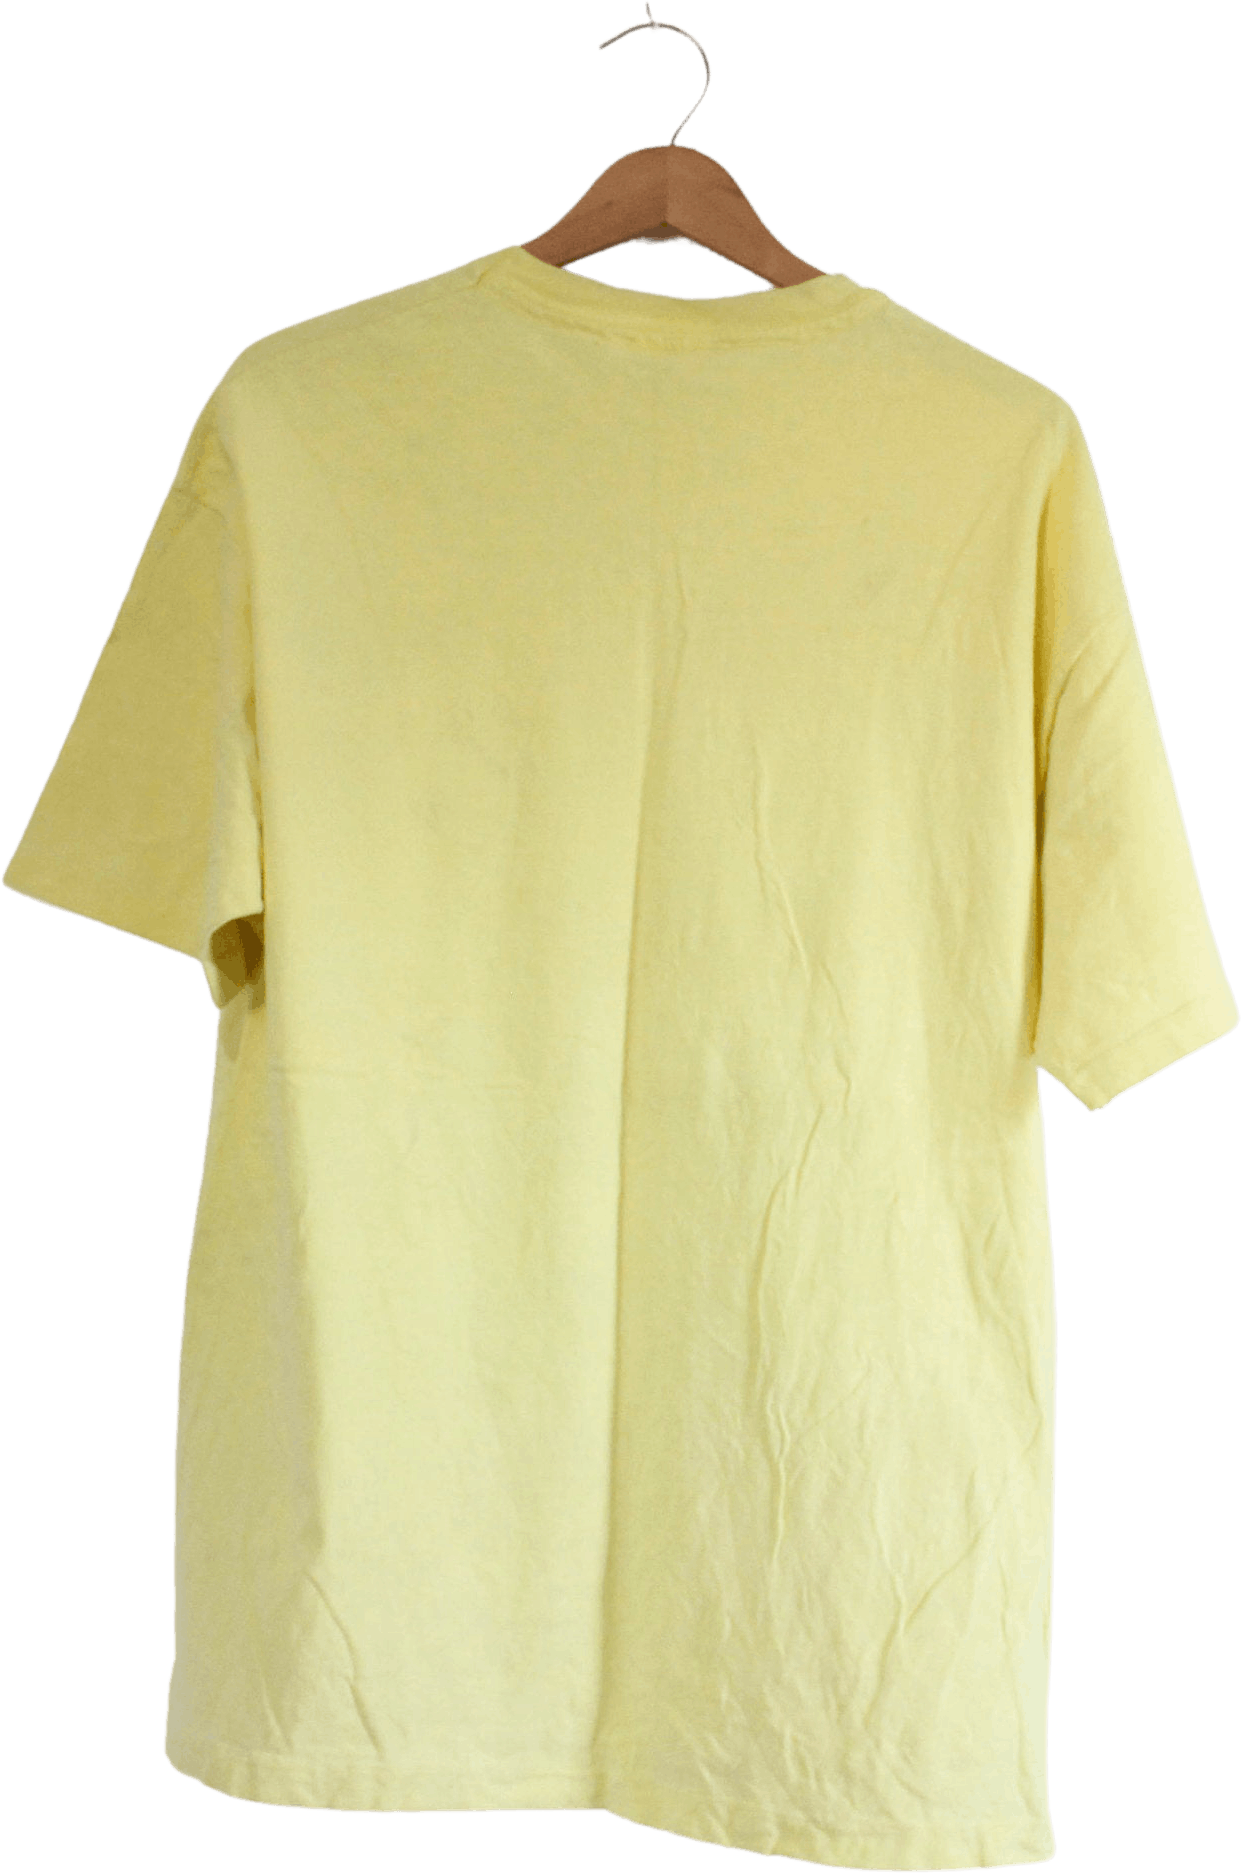 Vintage Light Yellow Maui Hawaii Whale Graphic T-Shirt by Hanes | Shop ...